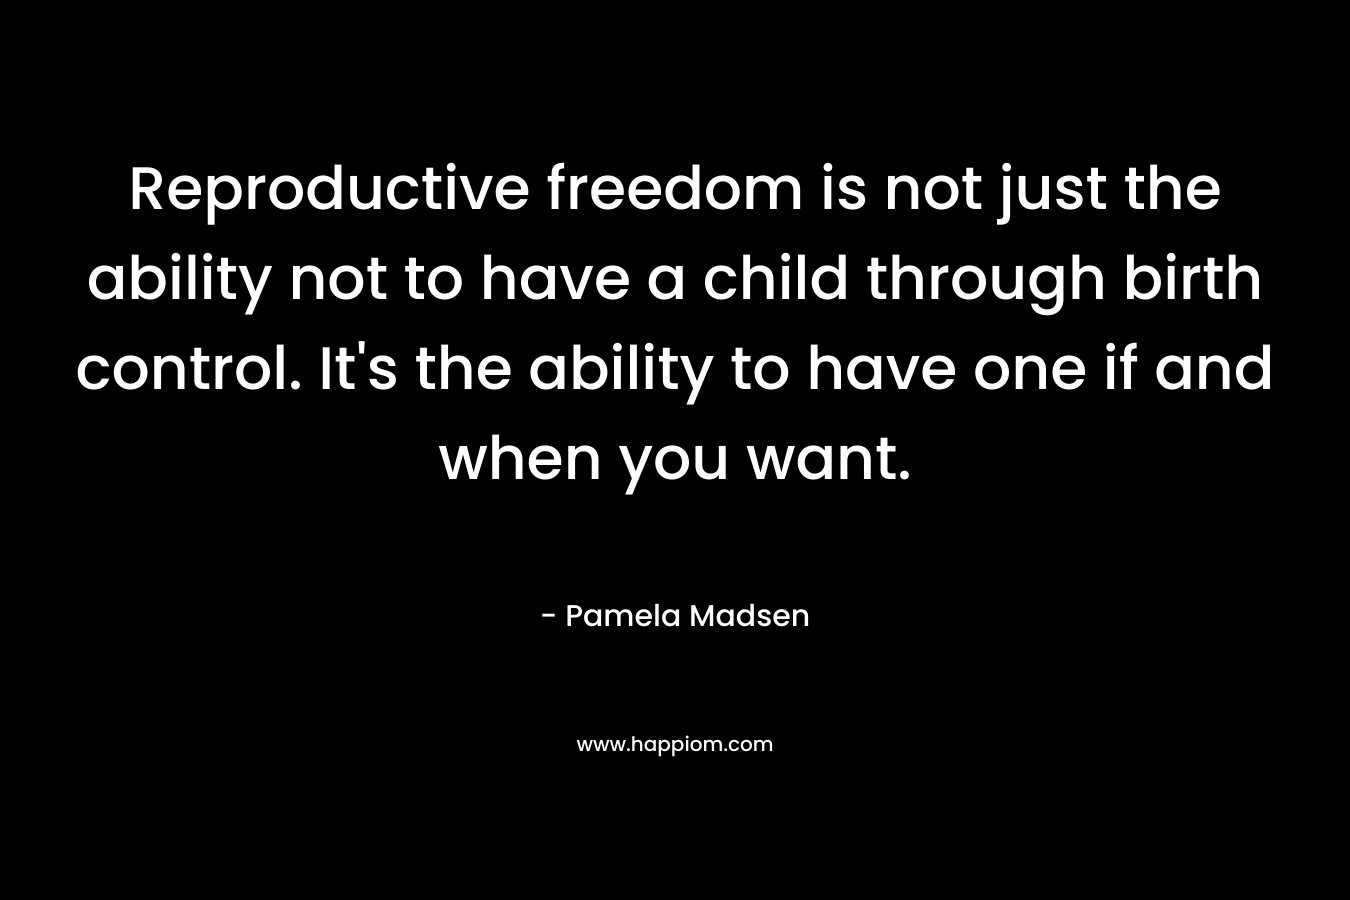 Reproductive freedom is not just the ability not to have a child through birth control. It's the ability to have one if and when you want.